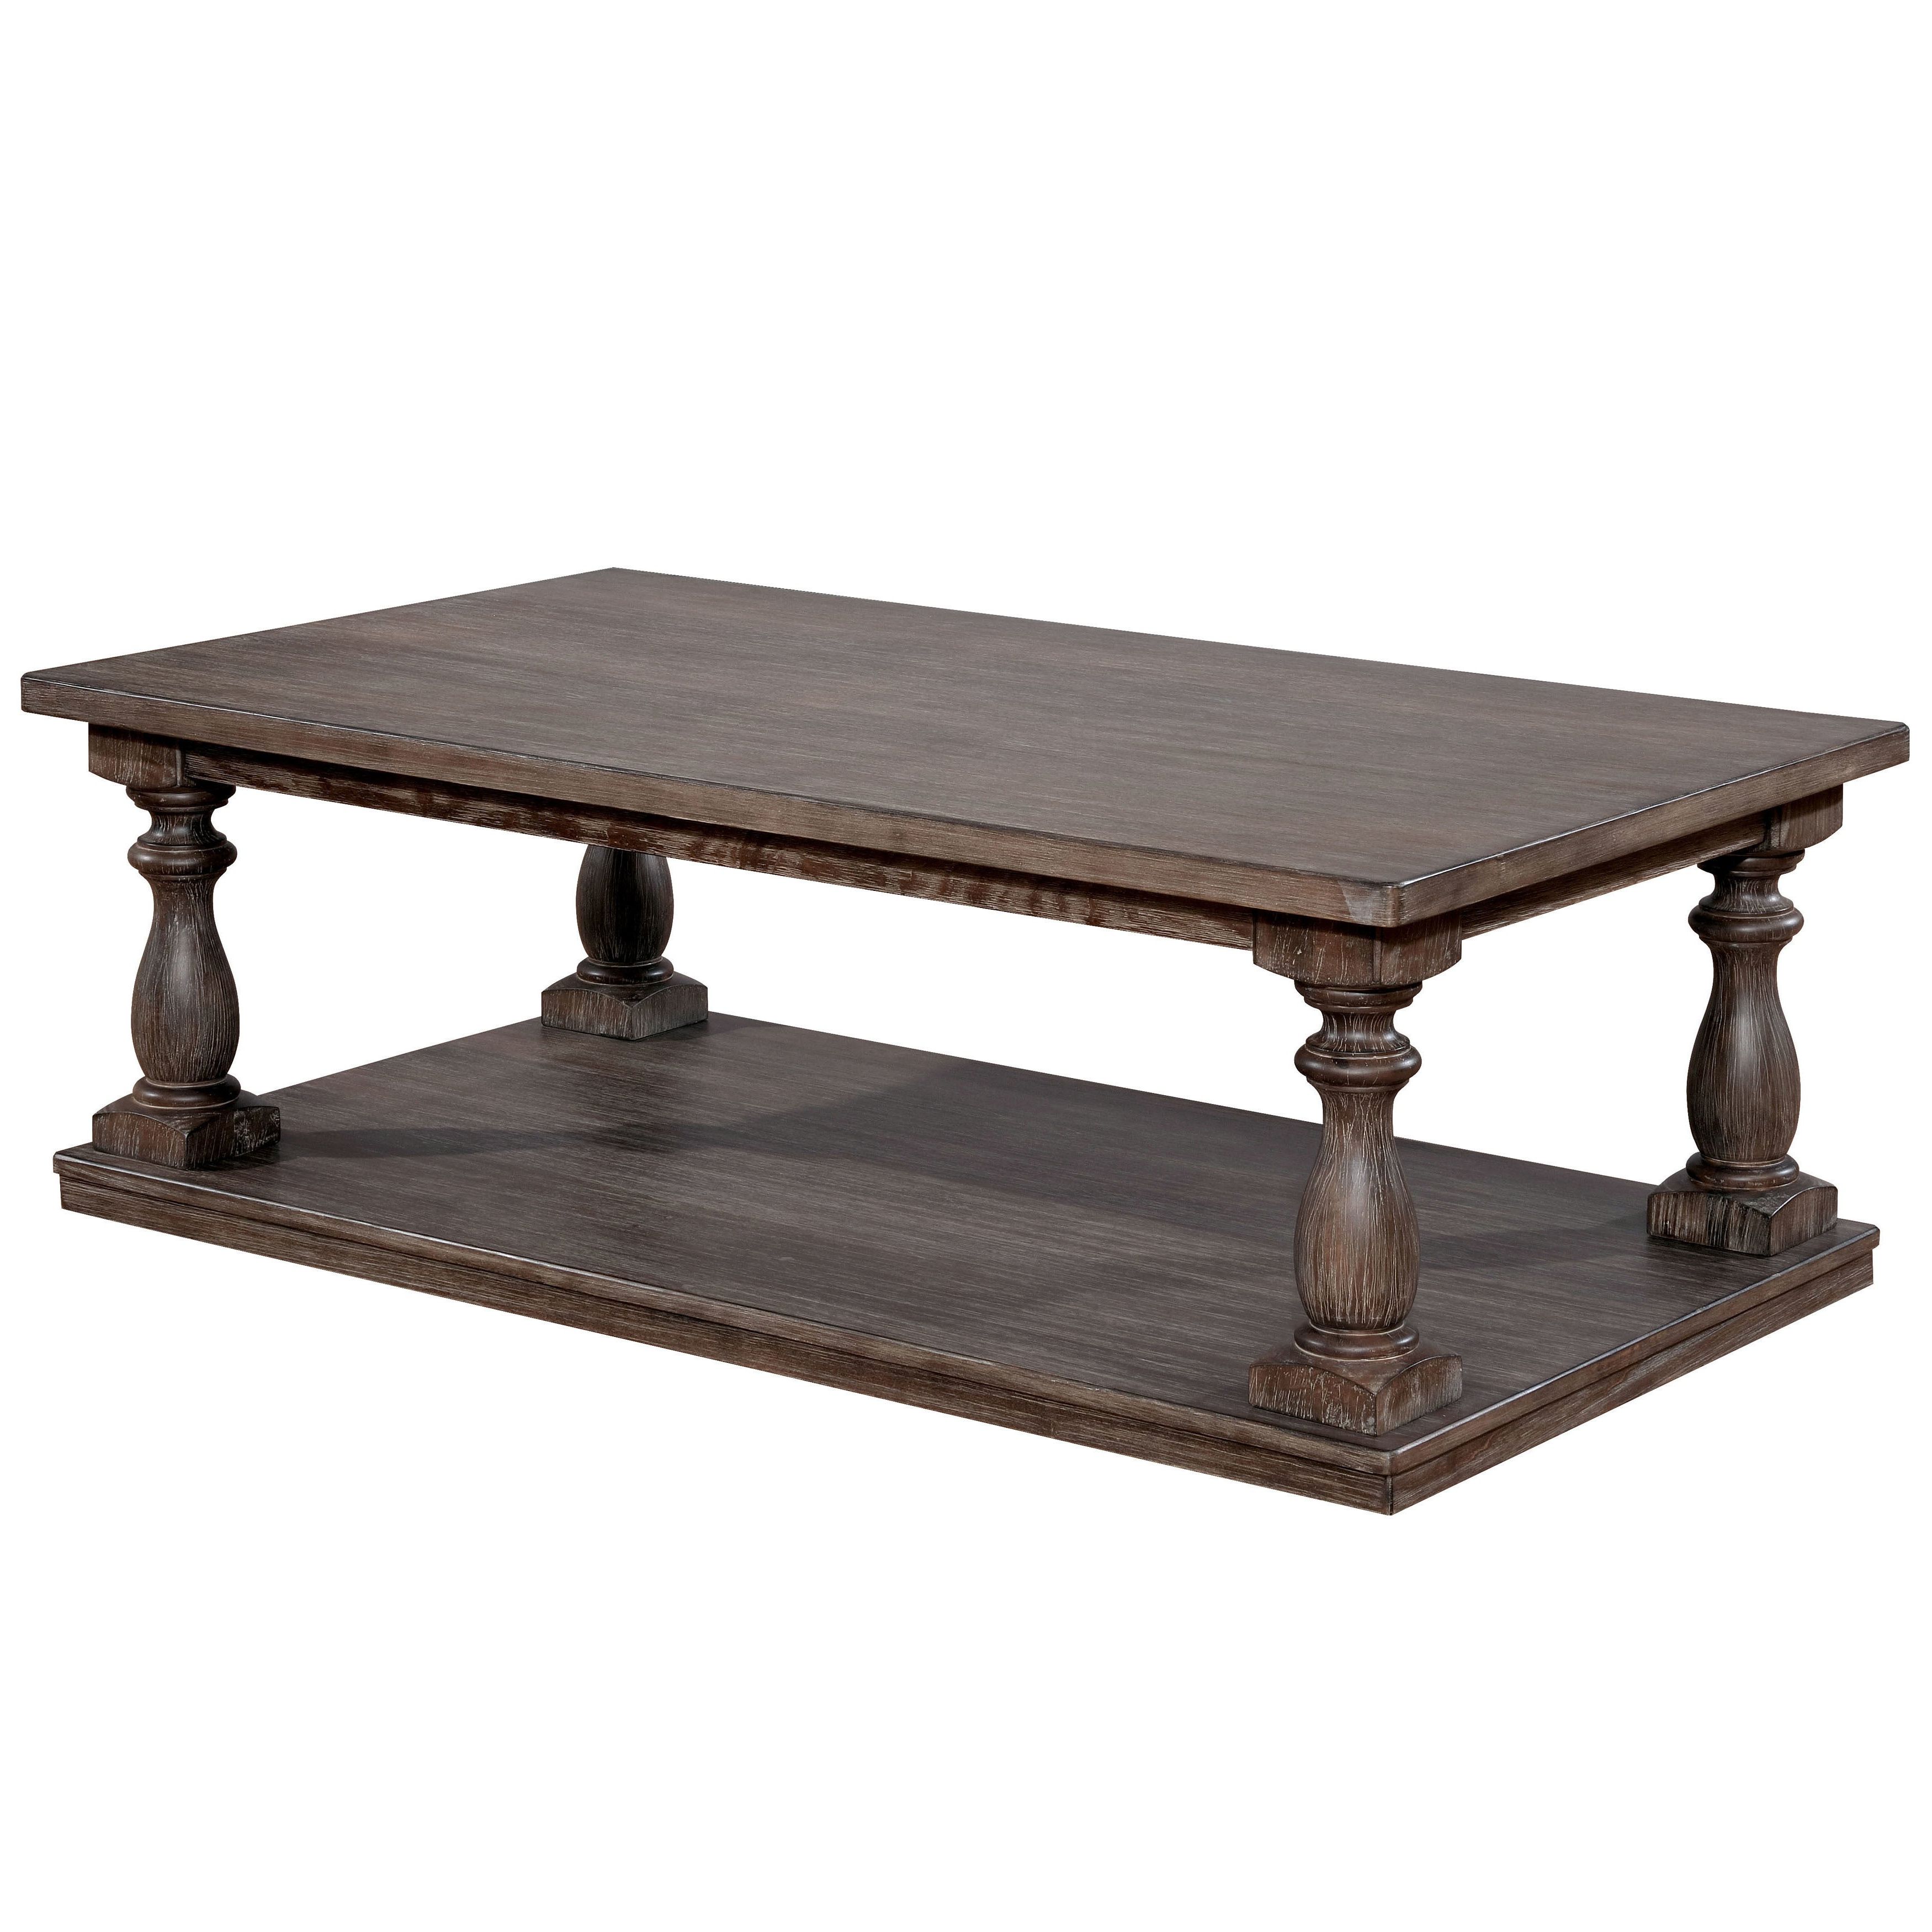 Popular Jessa Rustic Country 54 Inch Coffee Tables With Regard To Jessa Rustic Country 54 Inch Coffee Tablefoa (View 5 of 20)